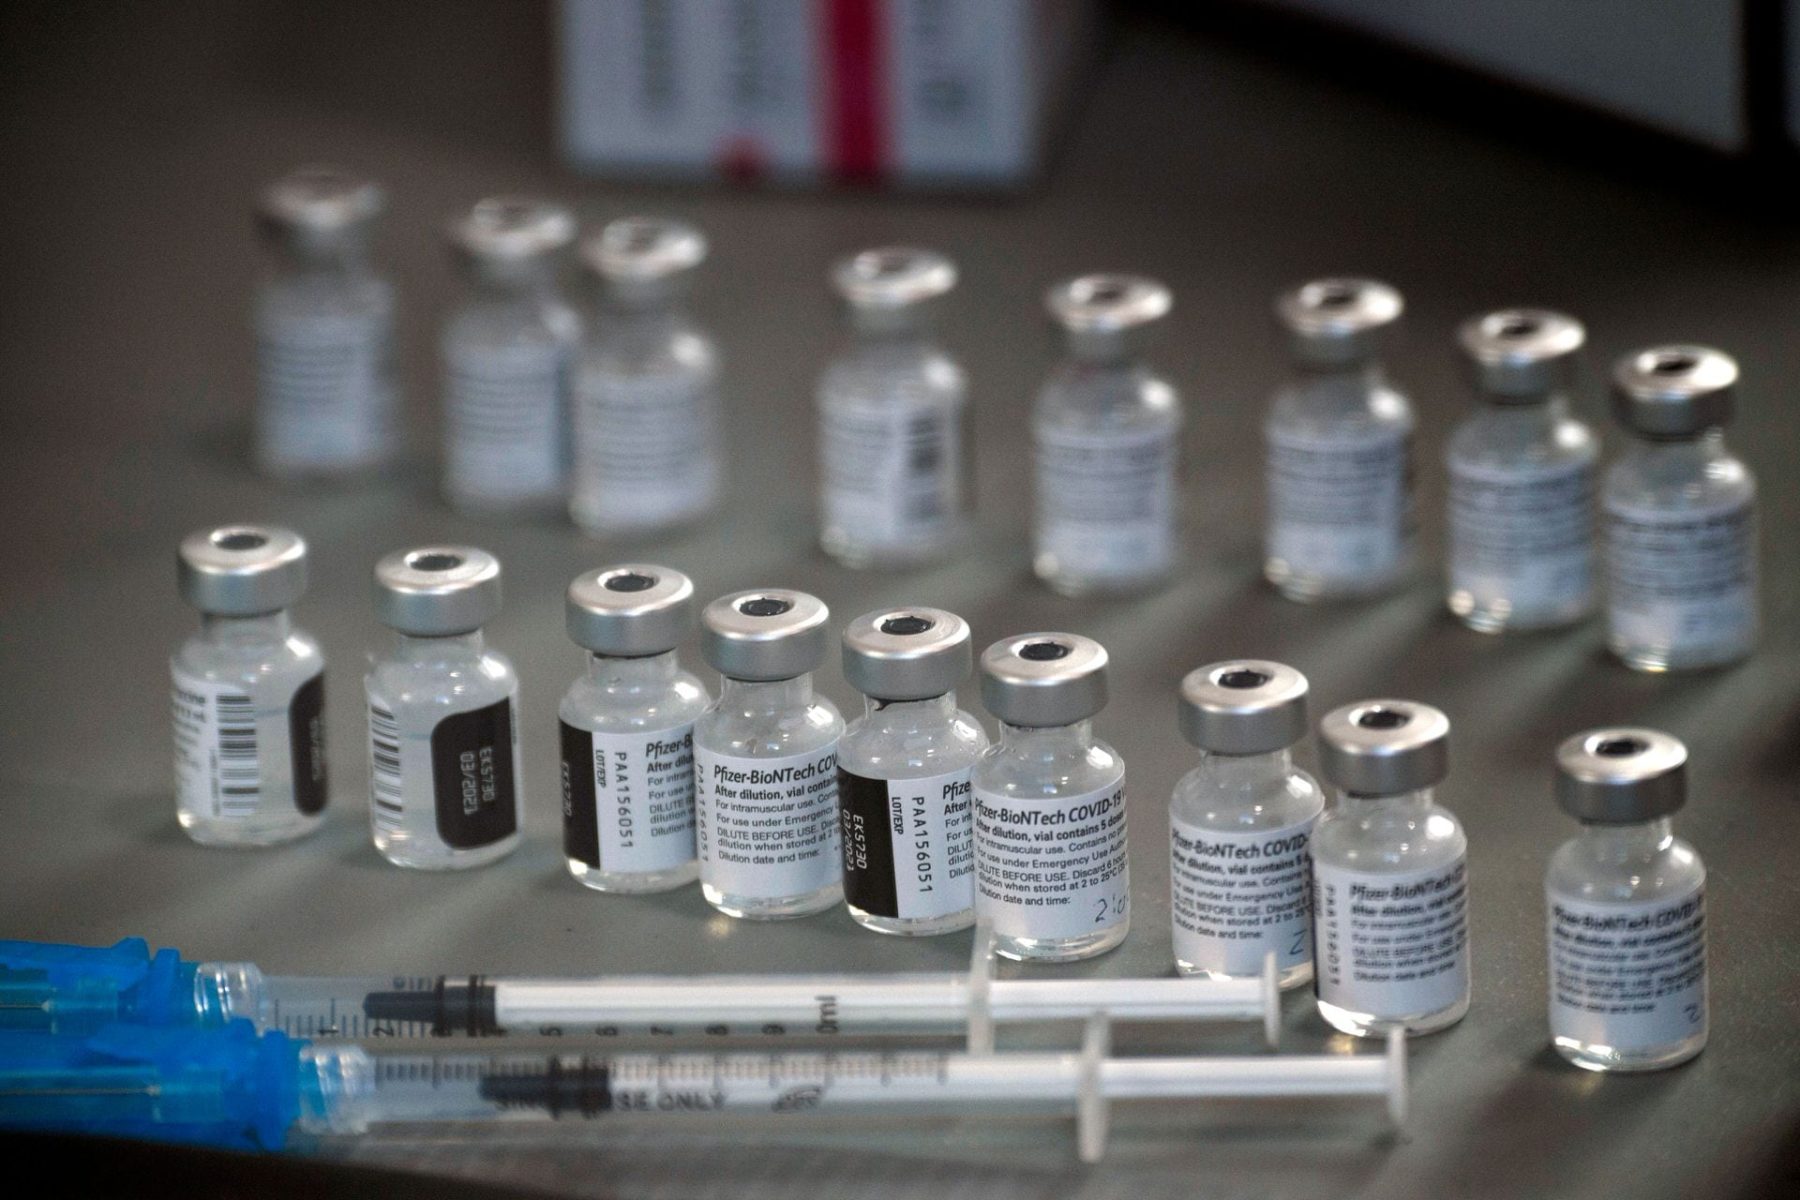 Close-up of syringes and vials of the Pfizer-BioNTech Covid-19 vaccine sitting on a table.